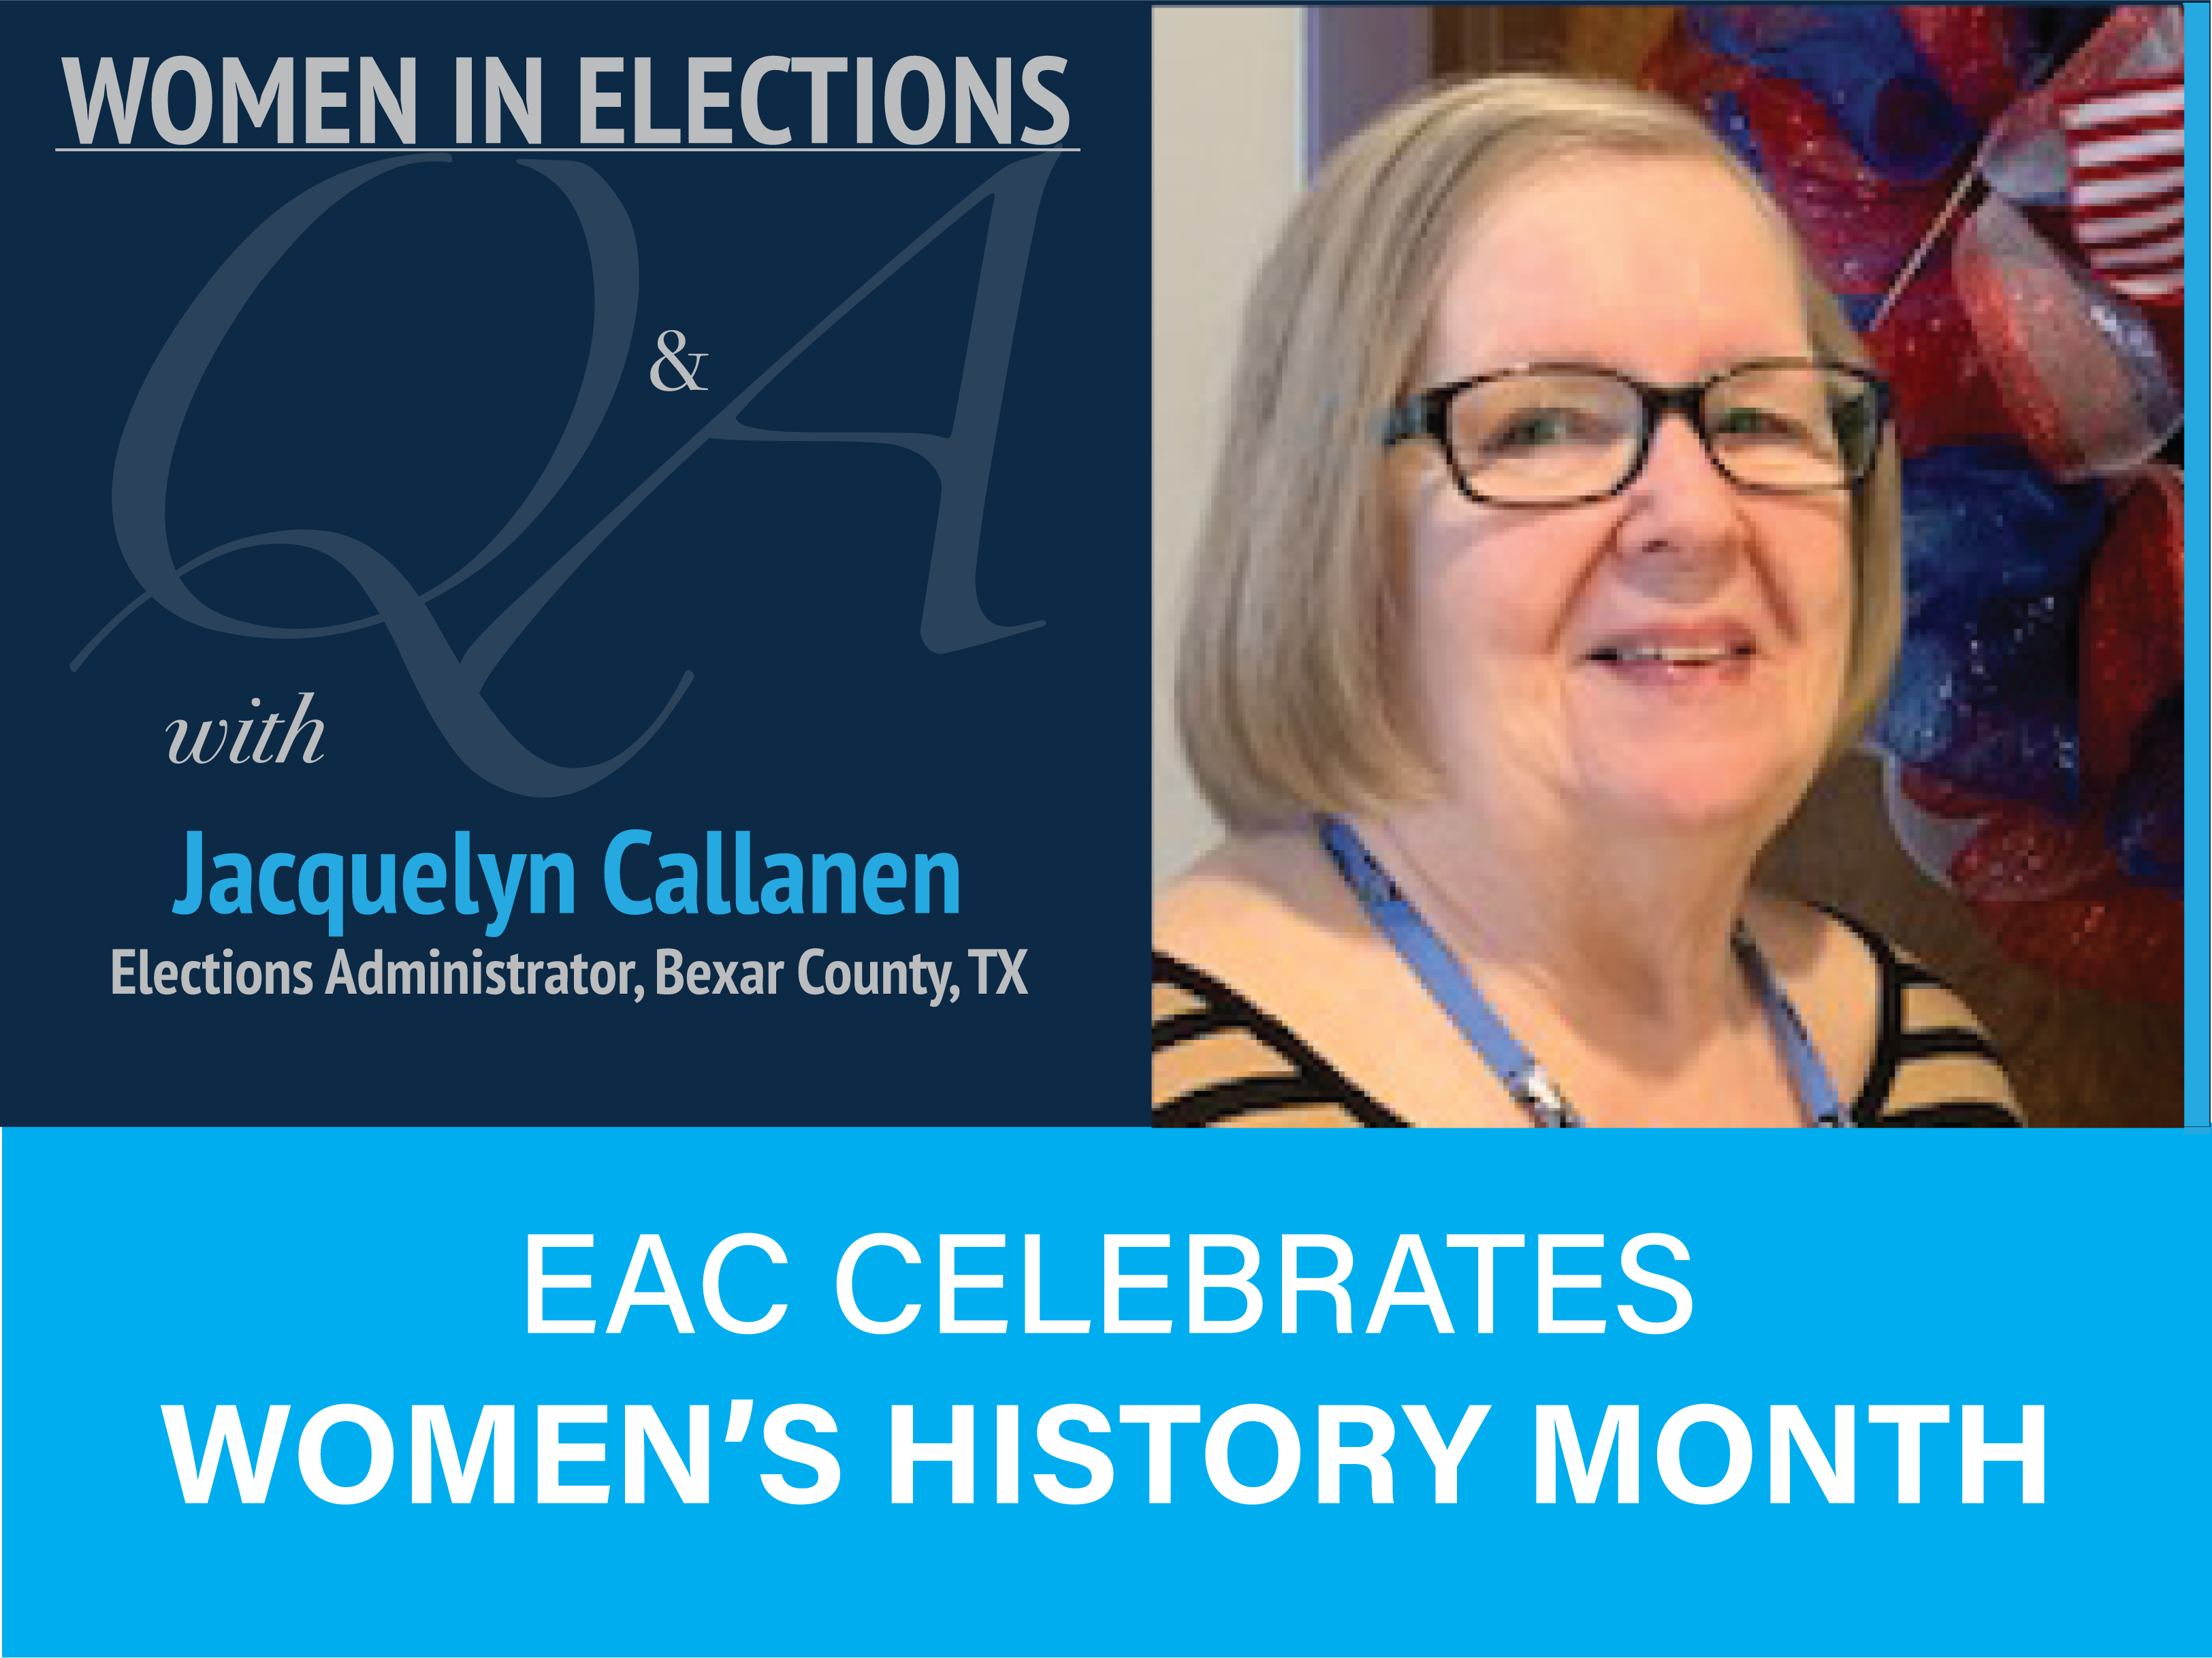 Women in Elections Q and A Series with Jacquelyn Callanen Election Administratior Bexar County, TX. EAC Celebrates Women's History Month